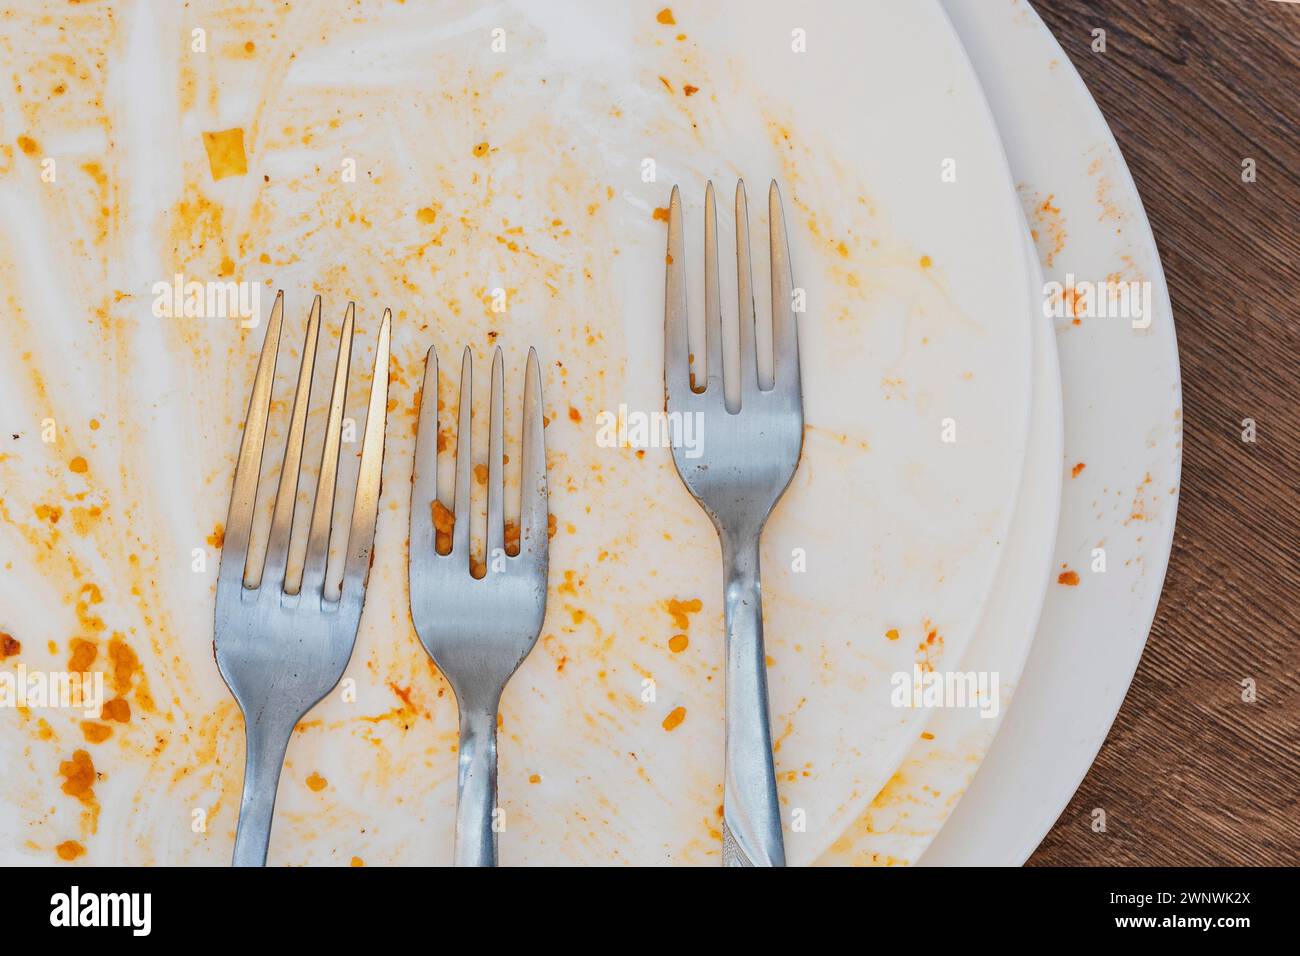 dirty plates after eating. Cutlery. forks on a plate. Dirty dishes after eating. End of meal. Good appetite, delicious food and dish concept Stock Photo